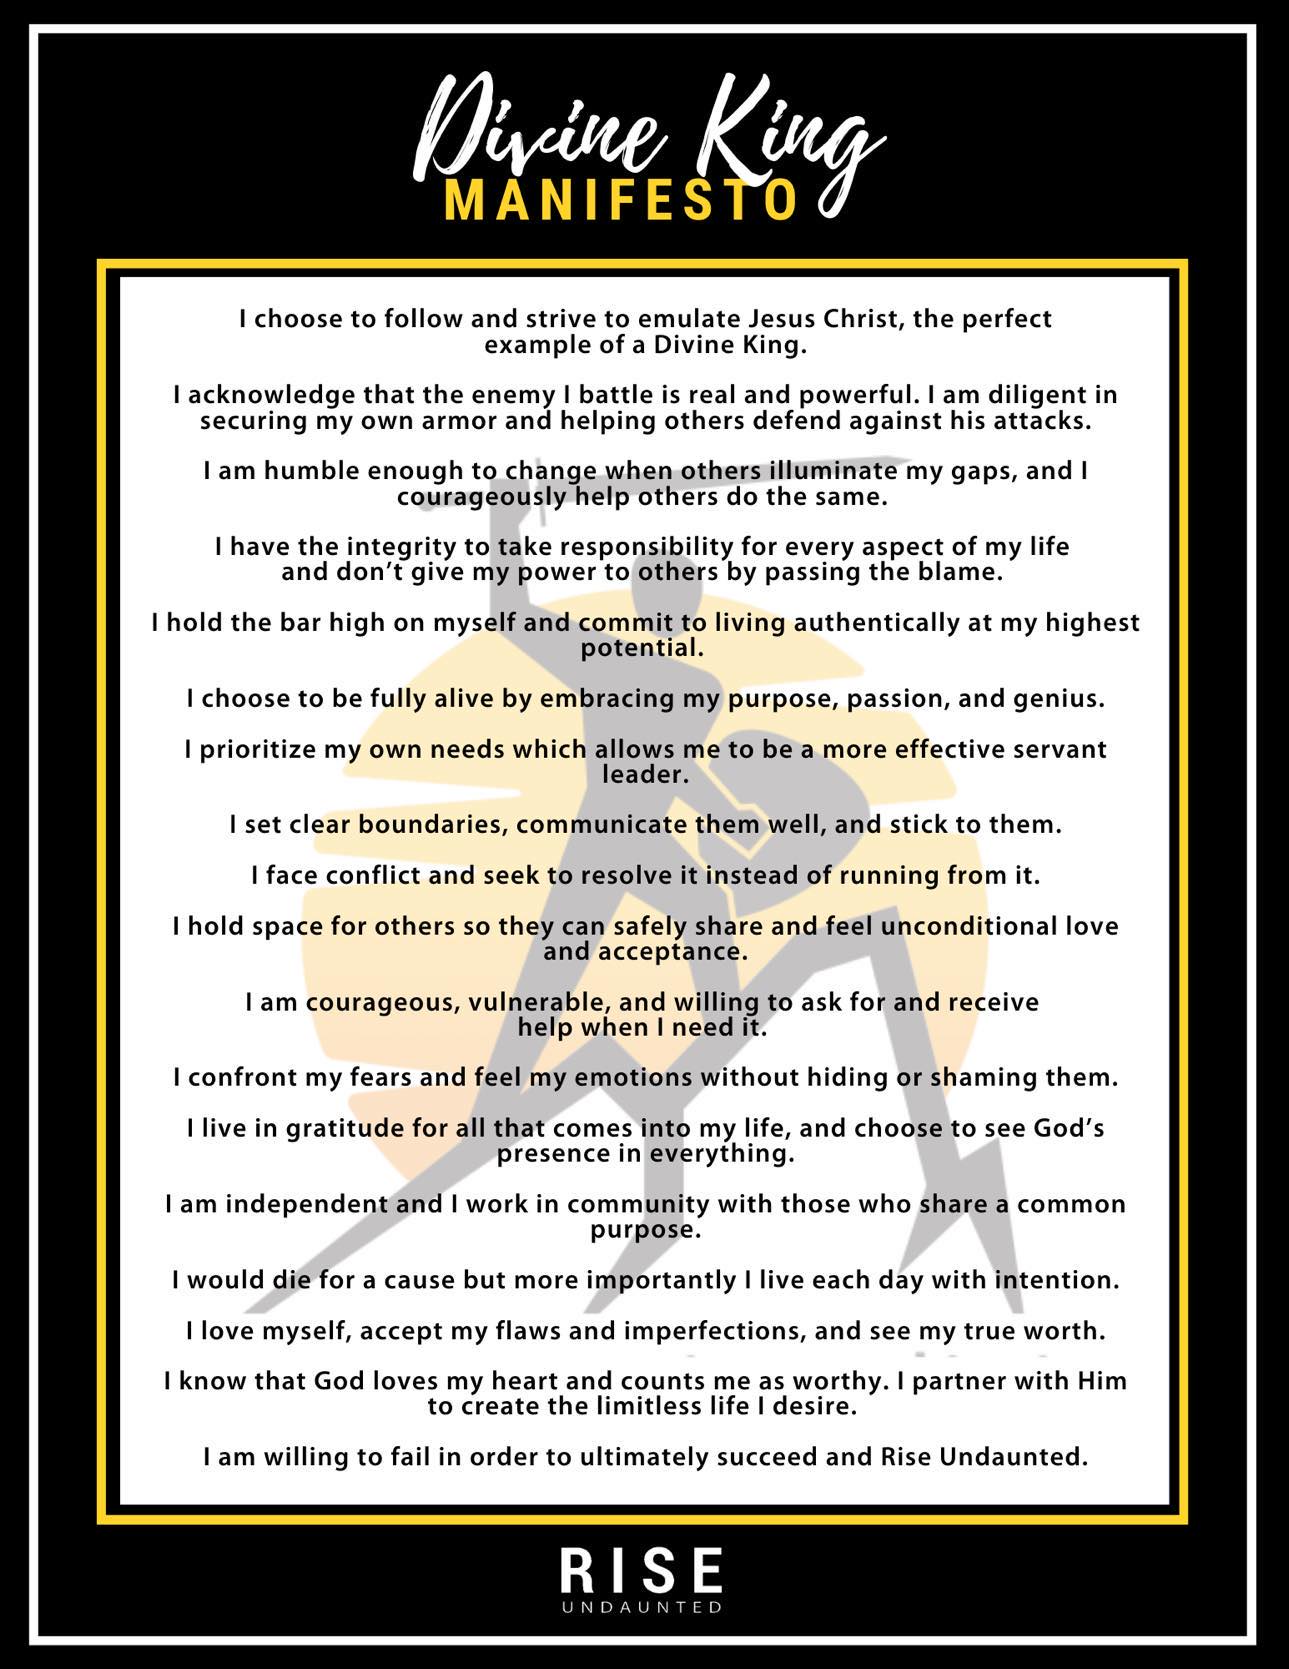 A manifesto is written in black and gold.